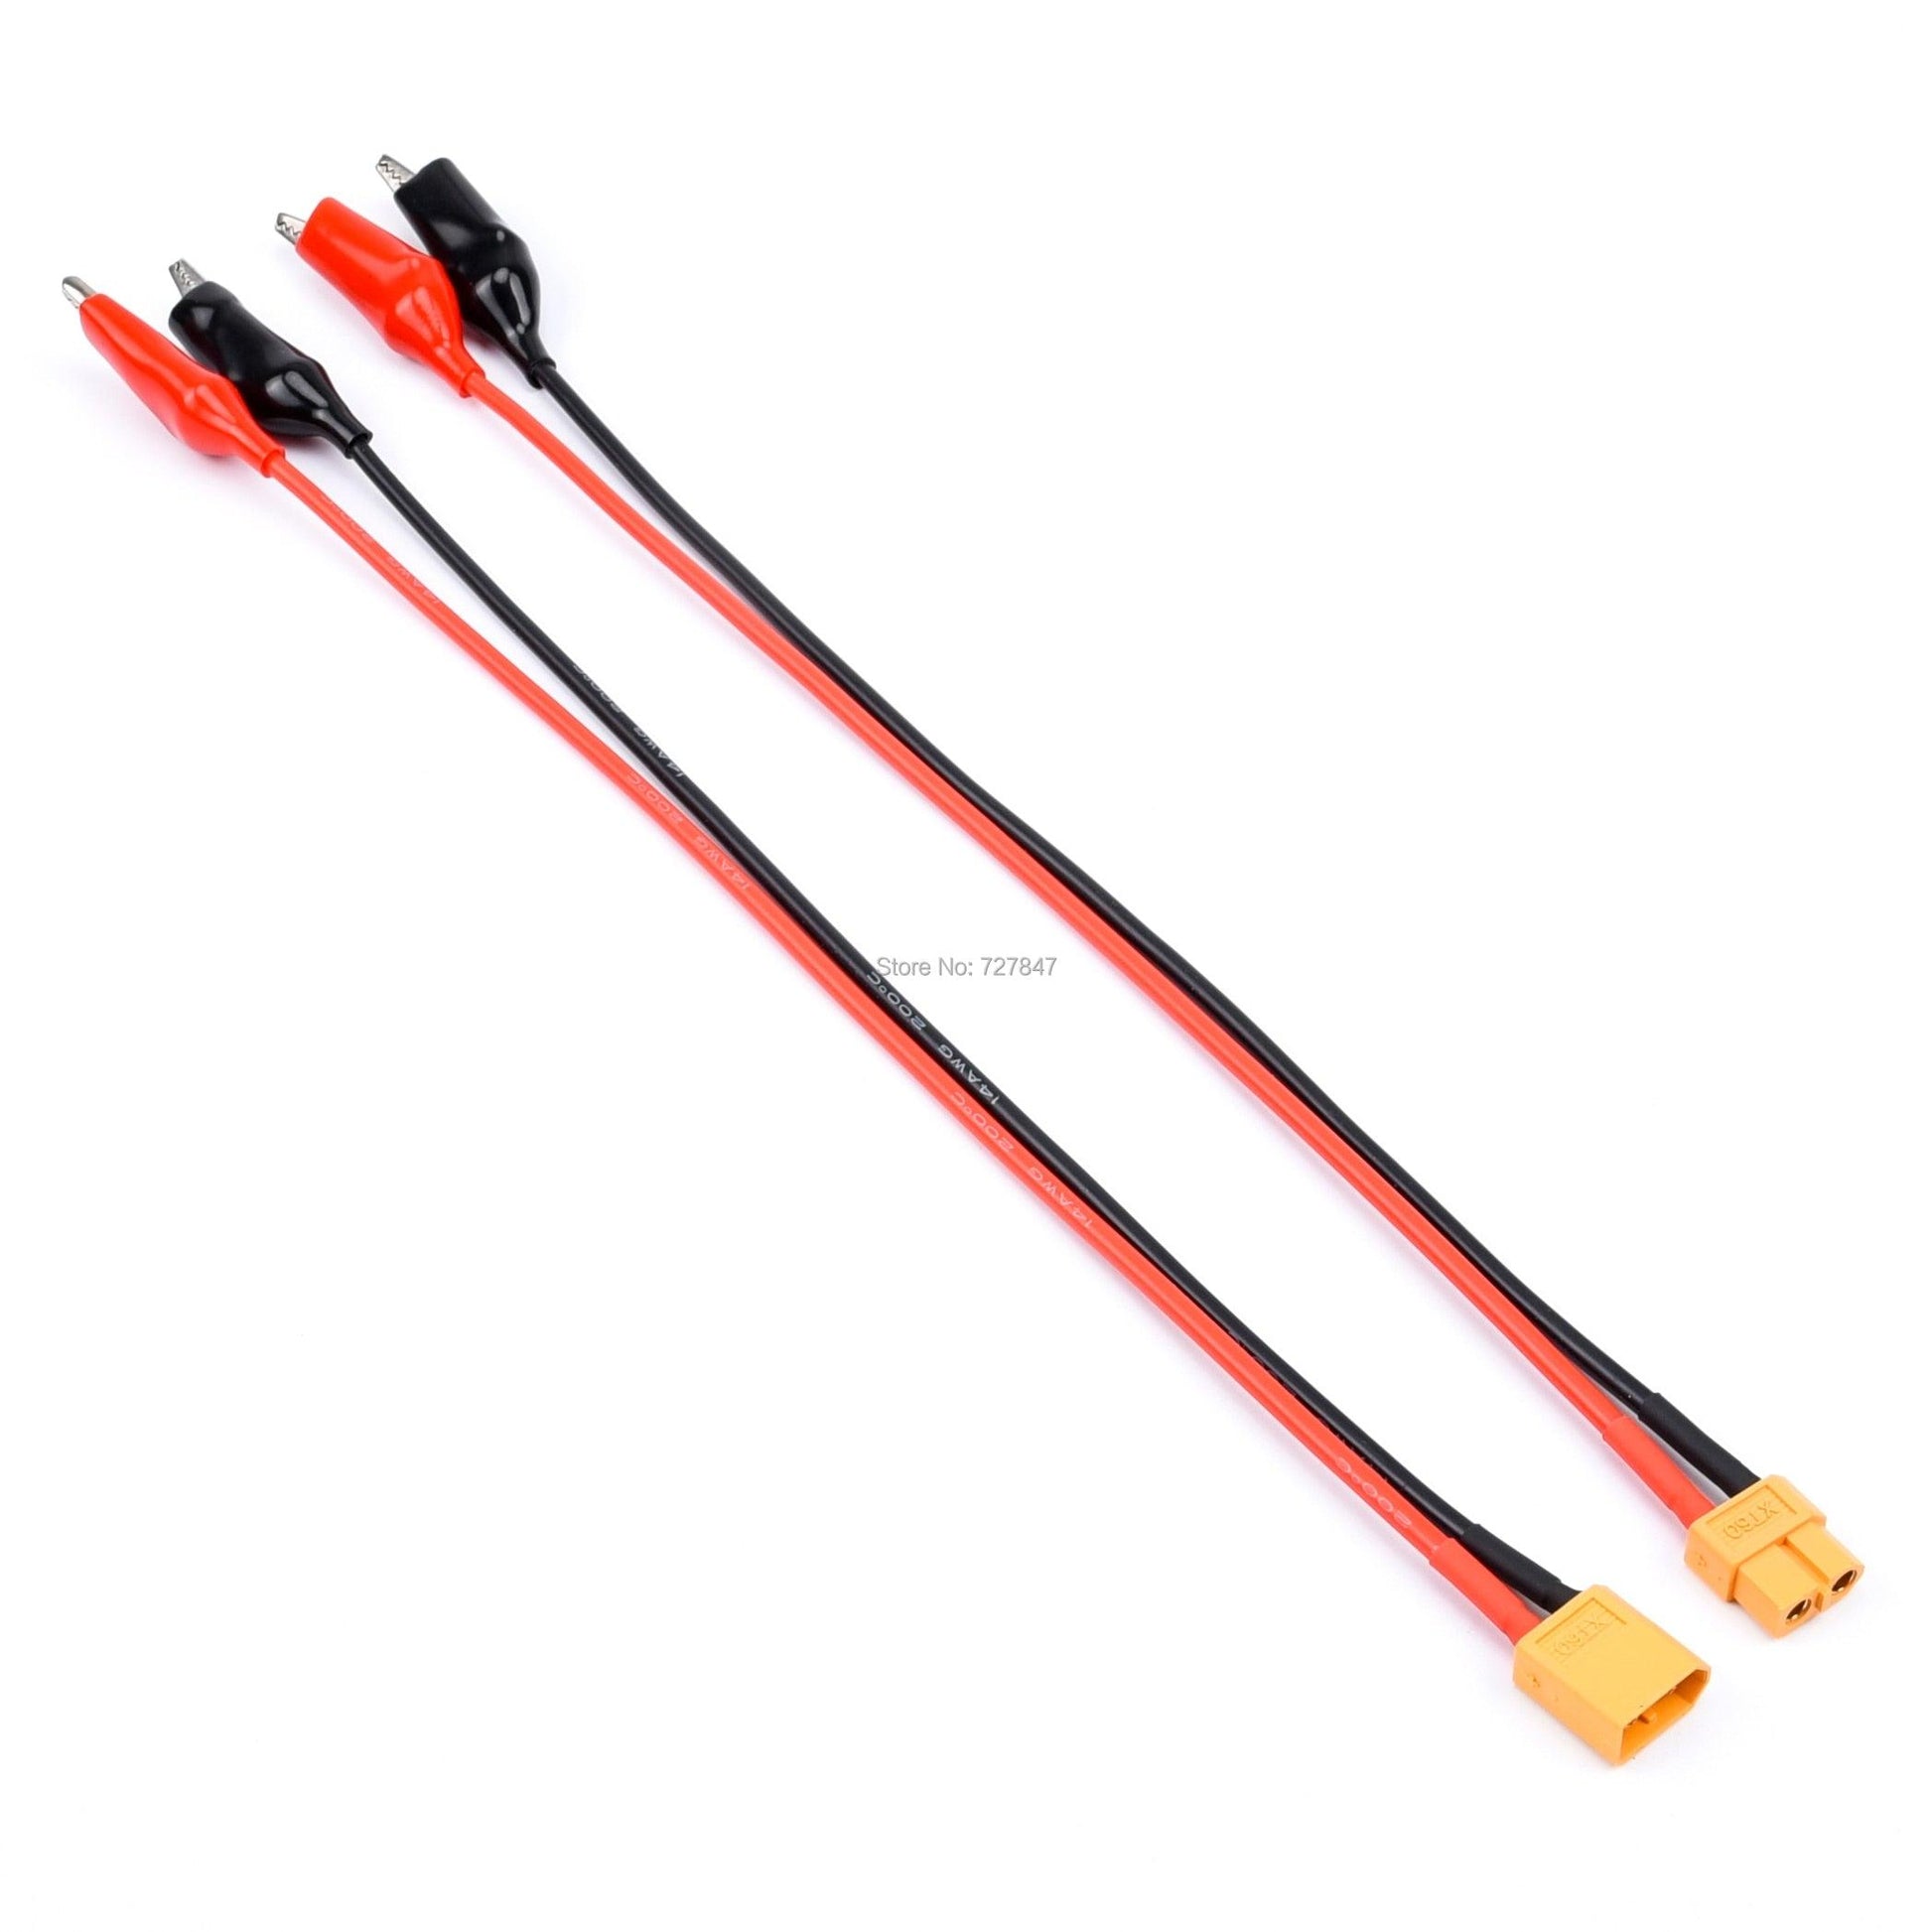 FPV Drone Charger Cable - Universal Charger Cable XT60 Male / Female to Crocodile Clip Conector Plug 14Awg Wire Cable - RCDrone